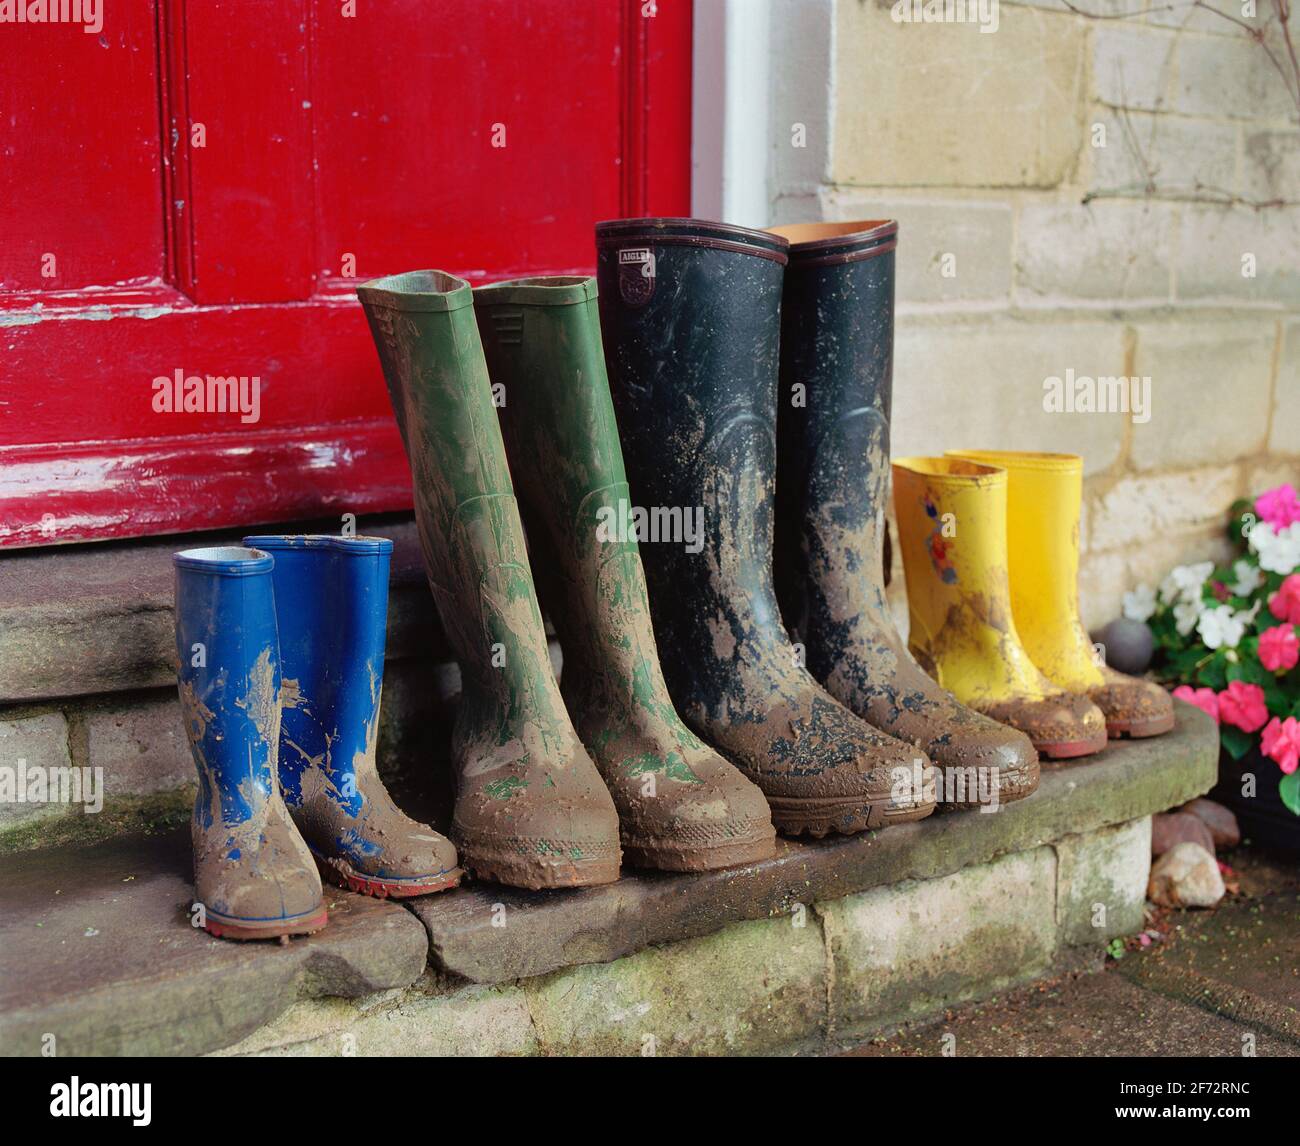 A family of wellington boots left on a doorstep with a red door behind. Stock Photo